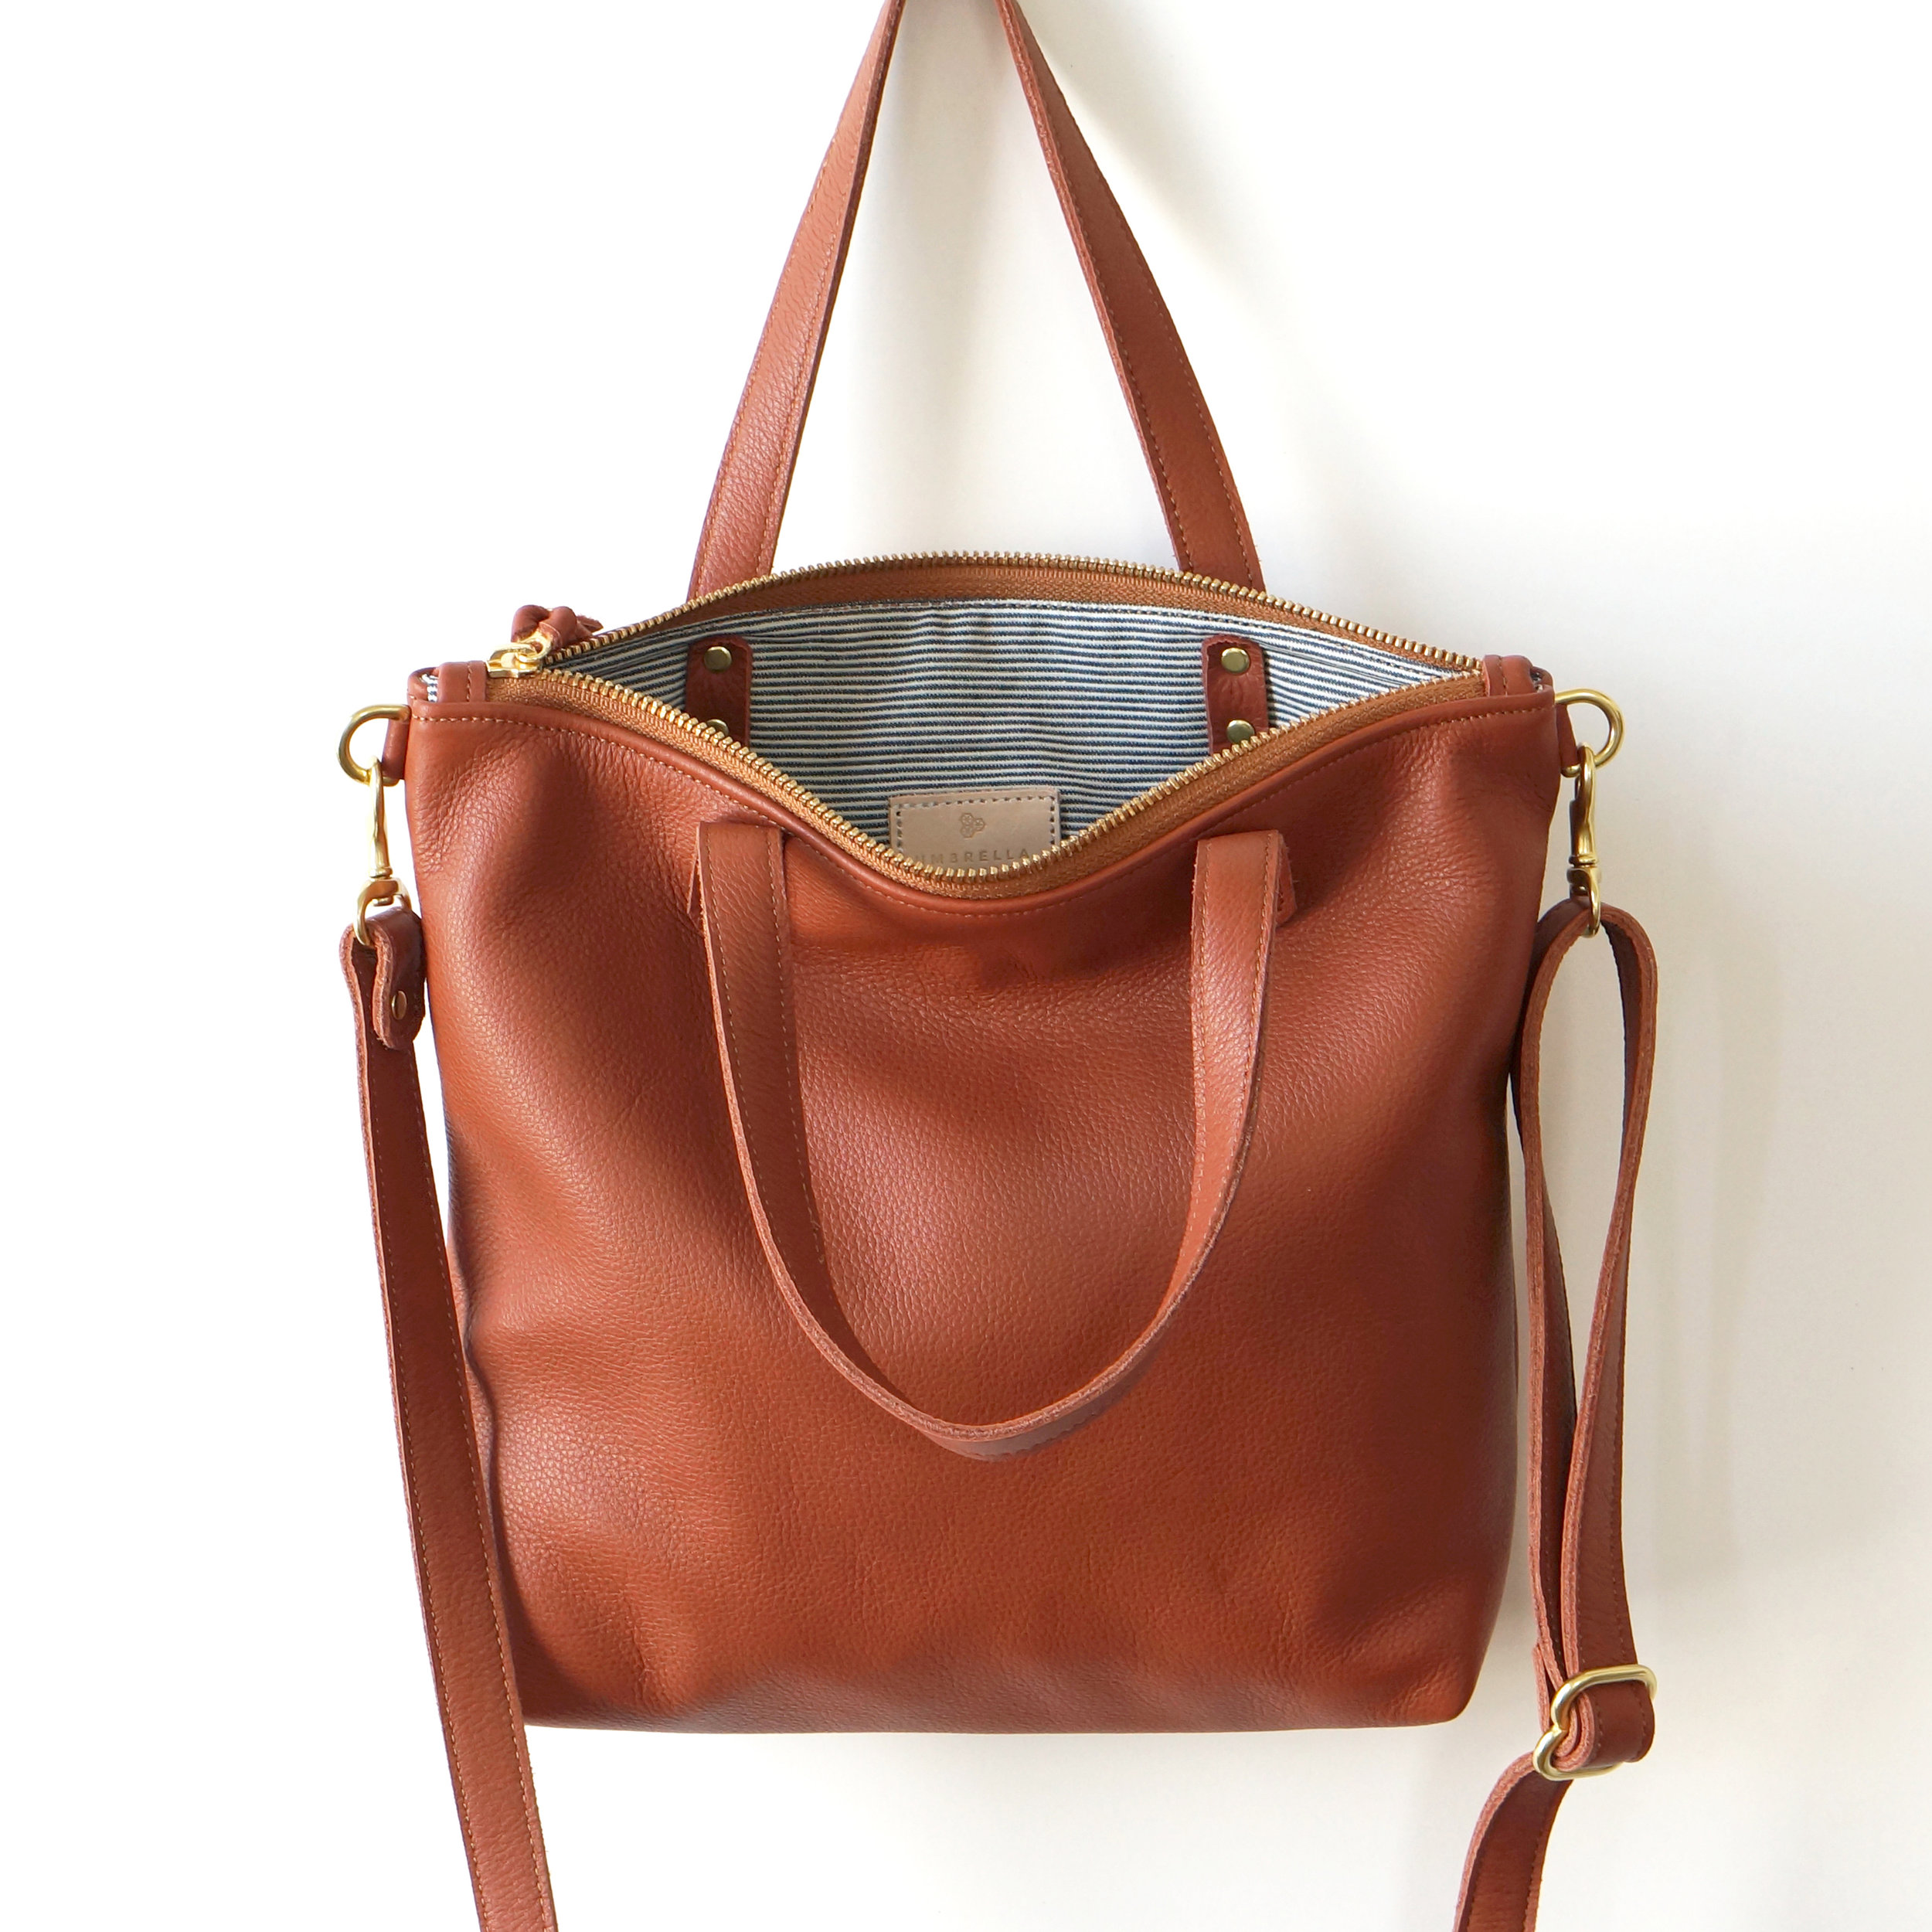 Umbrella Collective | Leather Bags, Leather Goods, Handmade in Portland ...